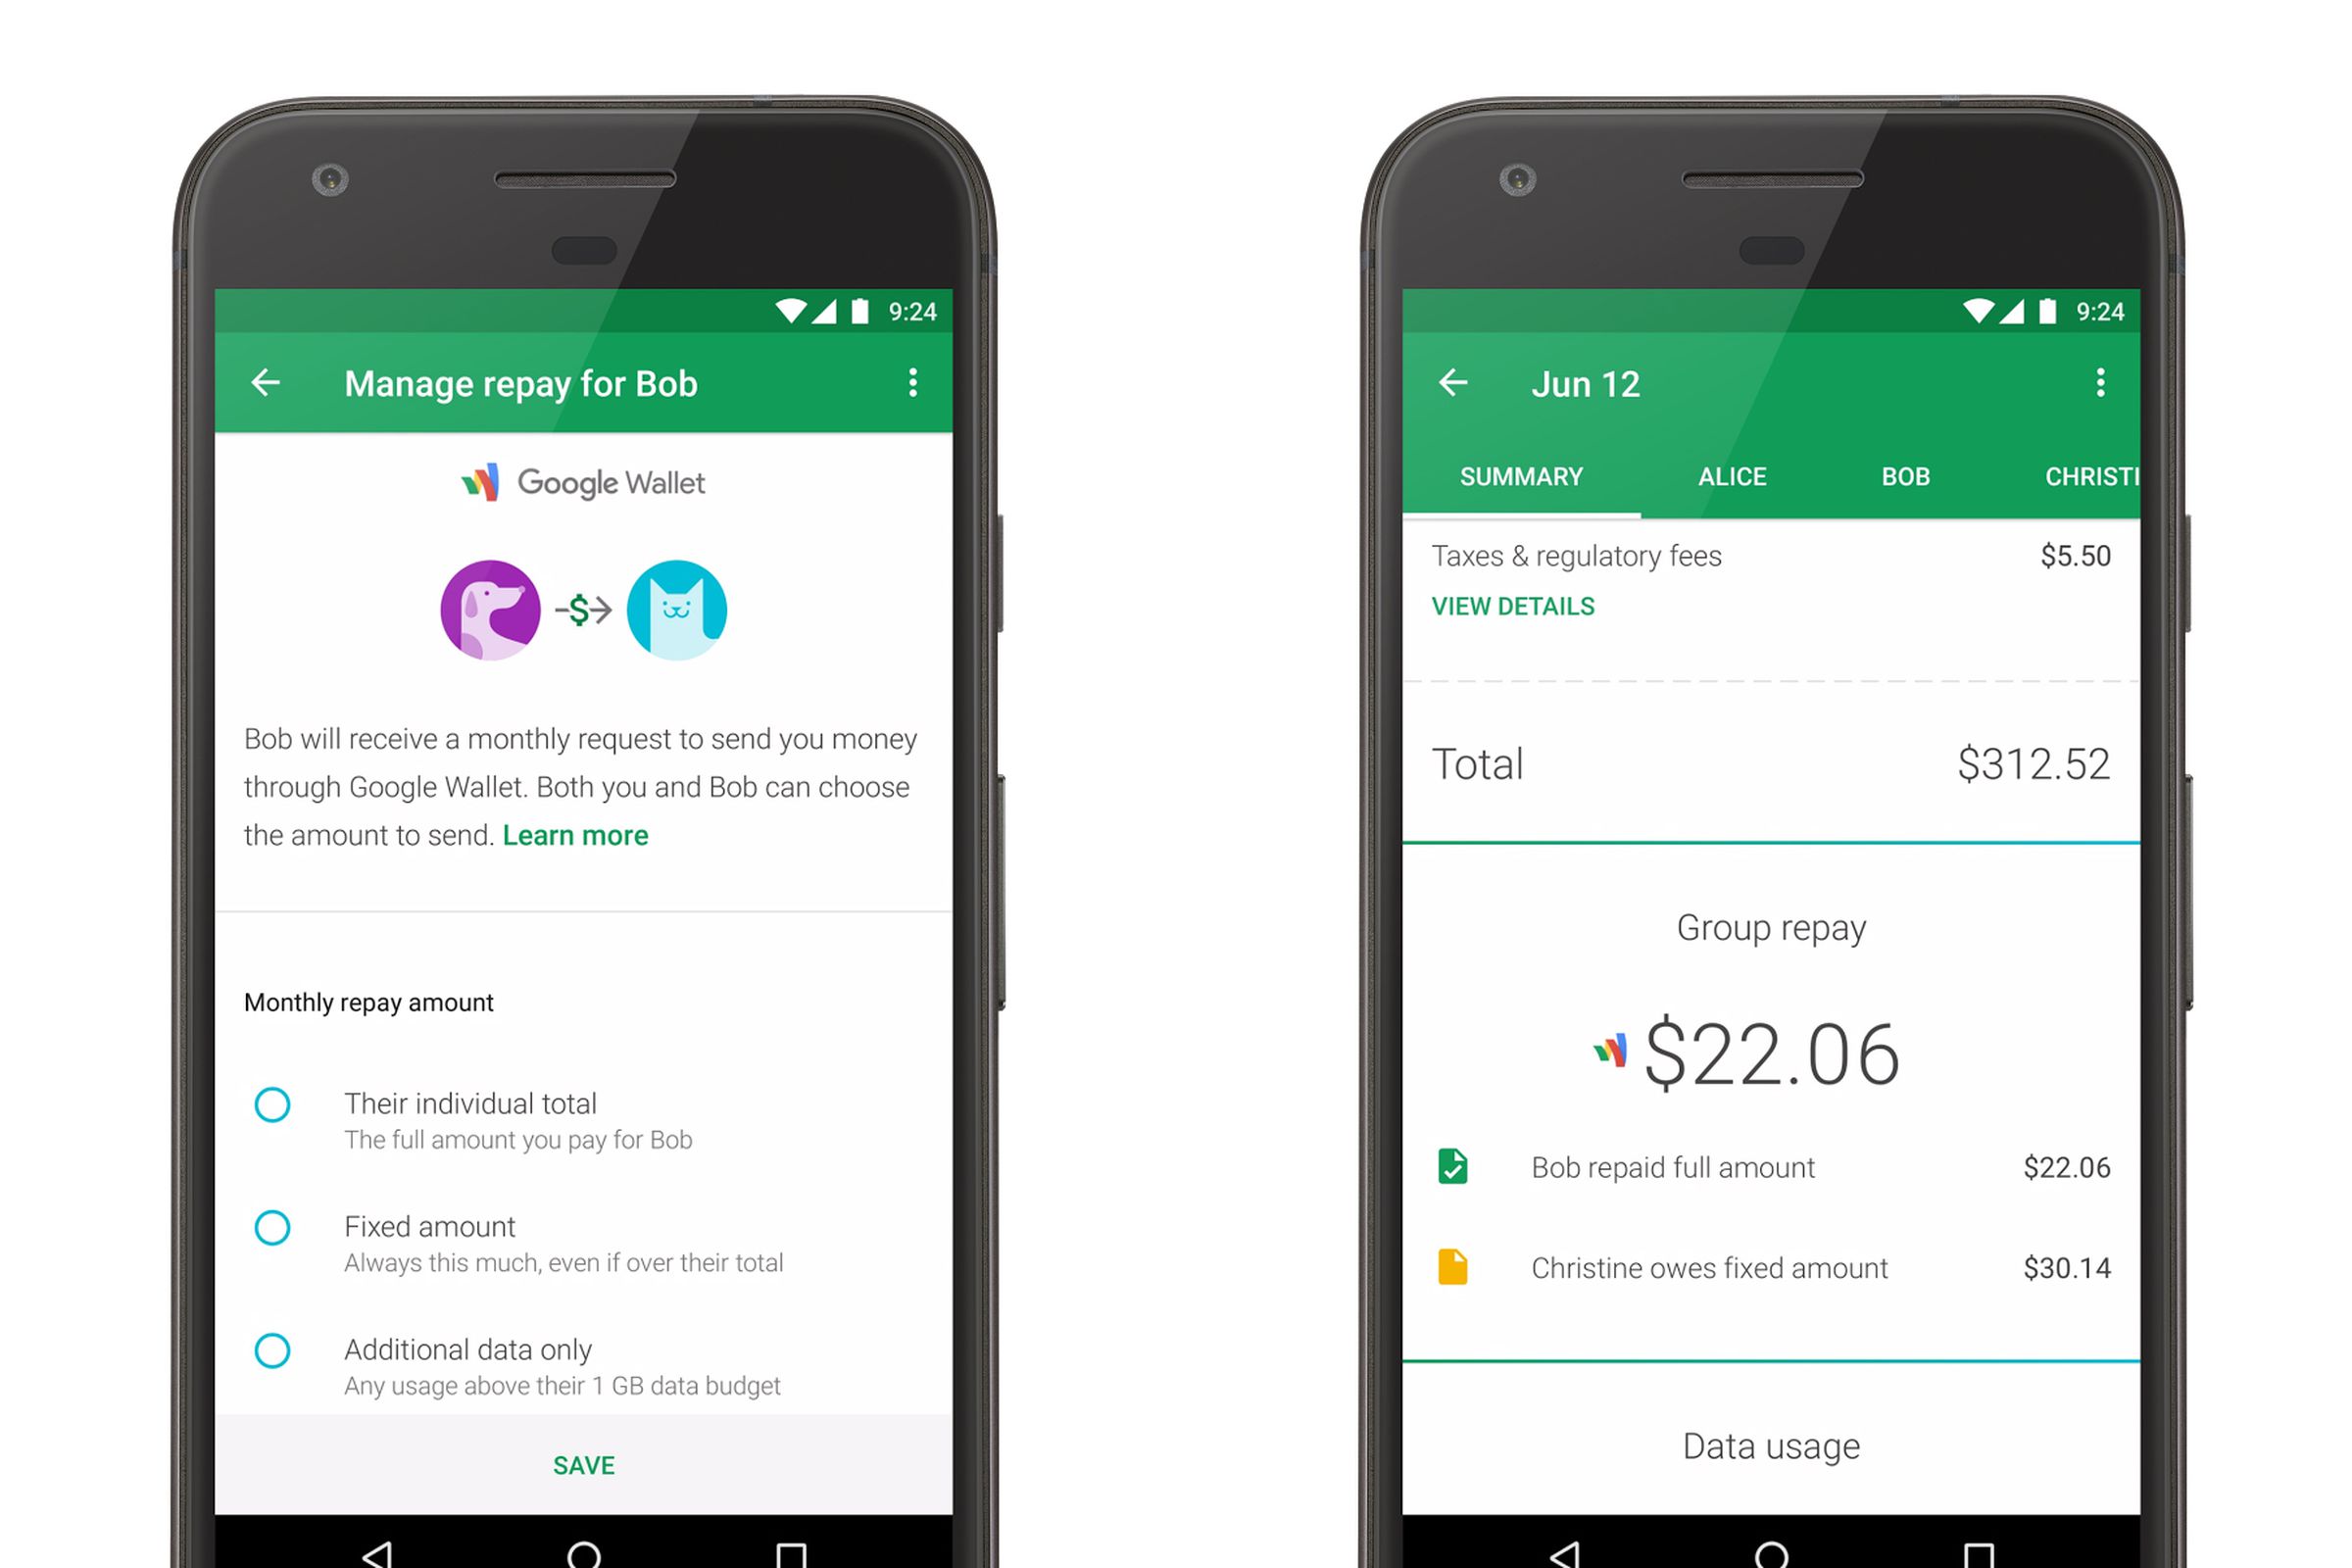 Project fi group repay